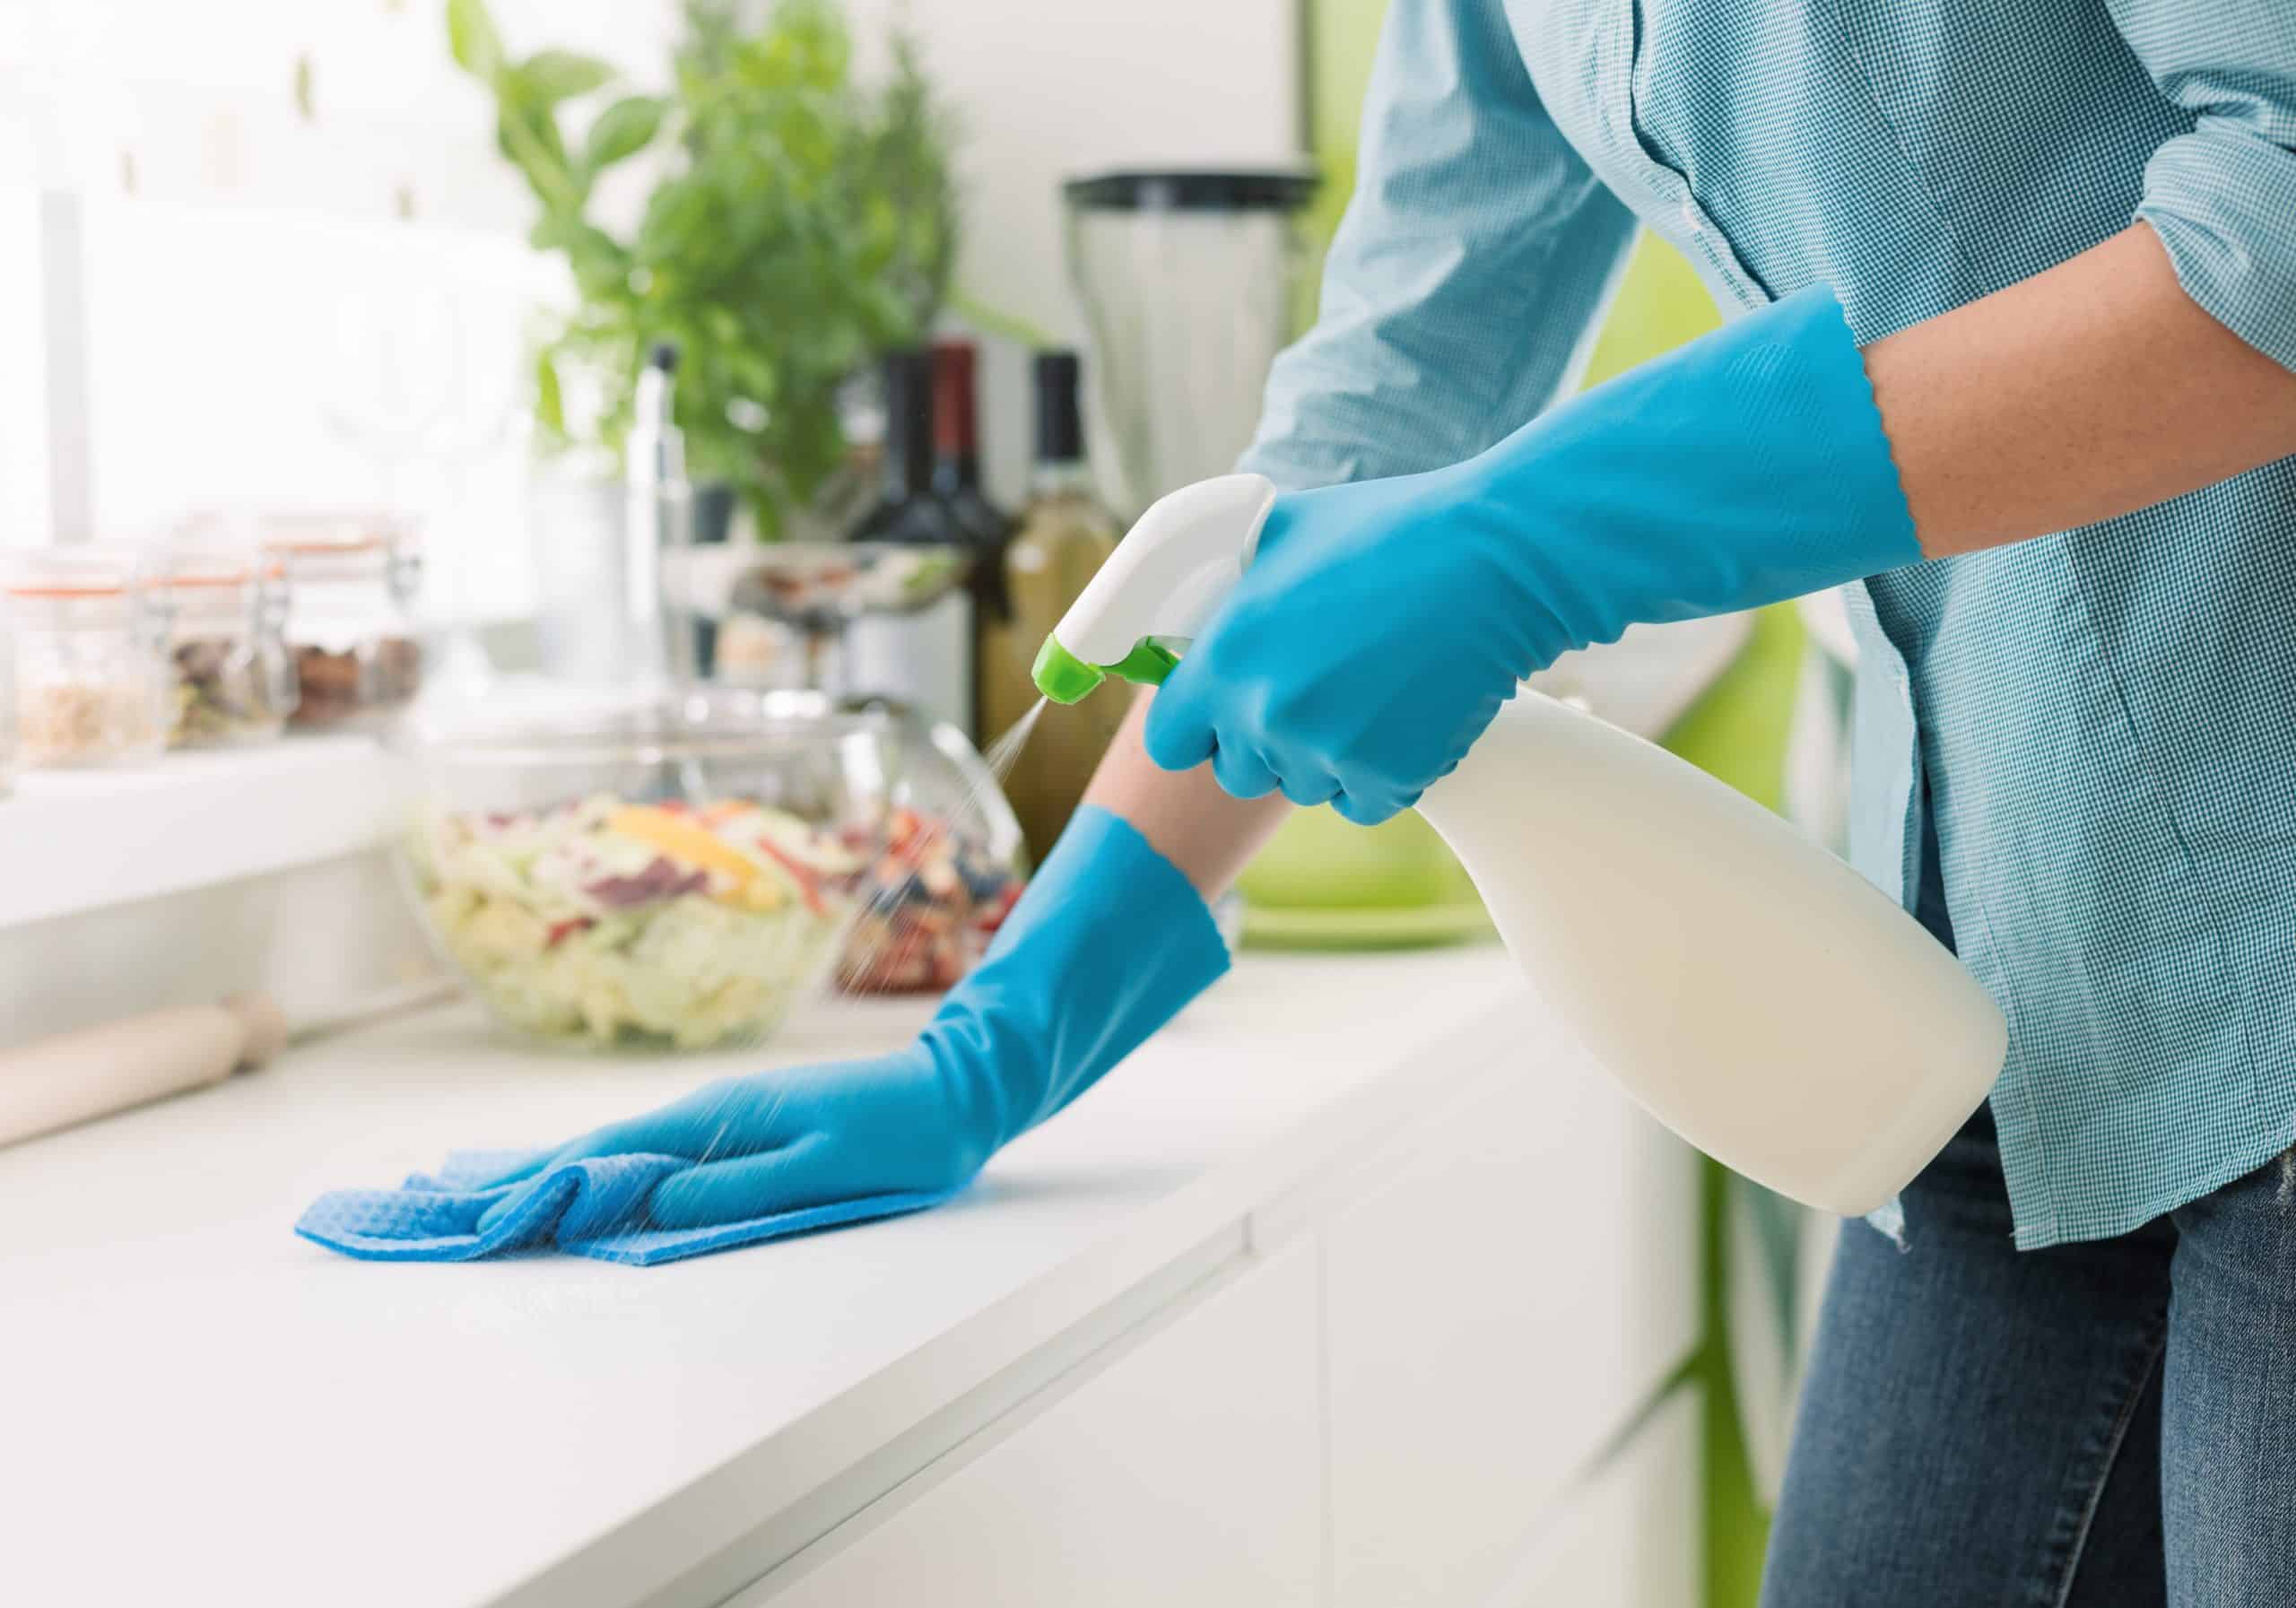 How to Keep Your Rental Properties Properly Sanitized and Safe with Smart Tech